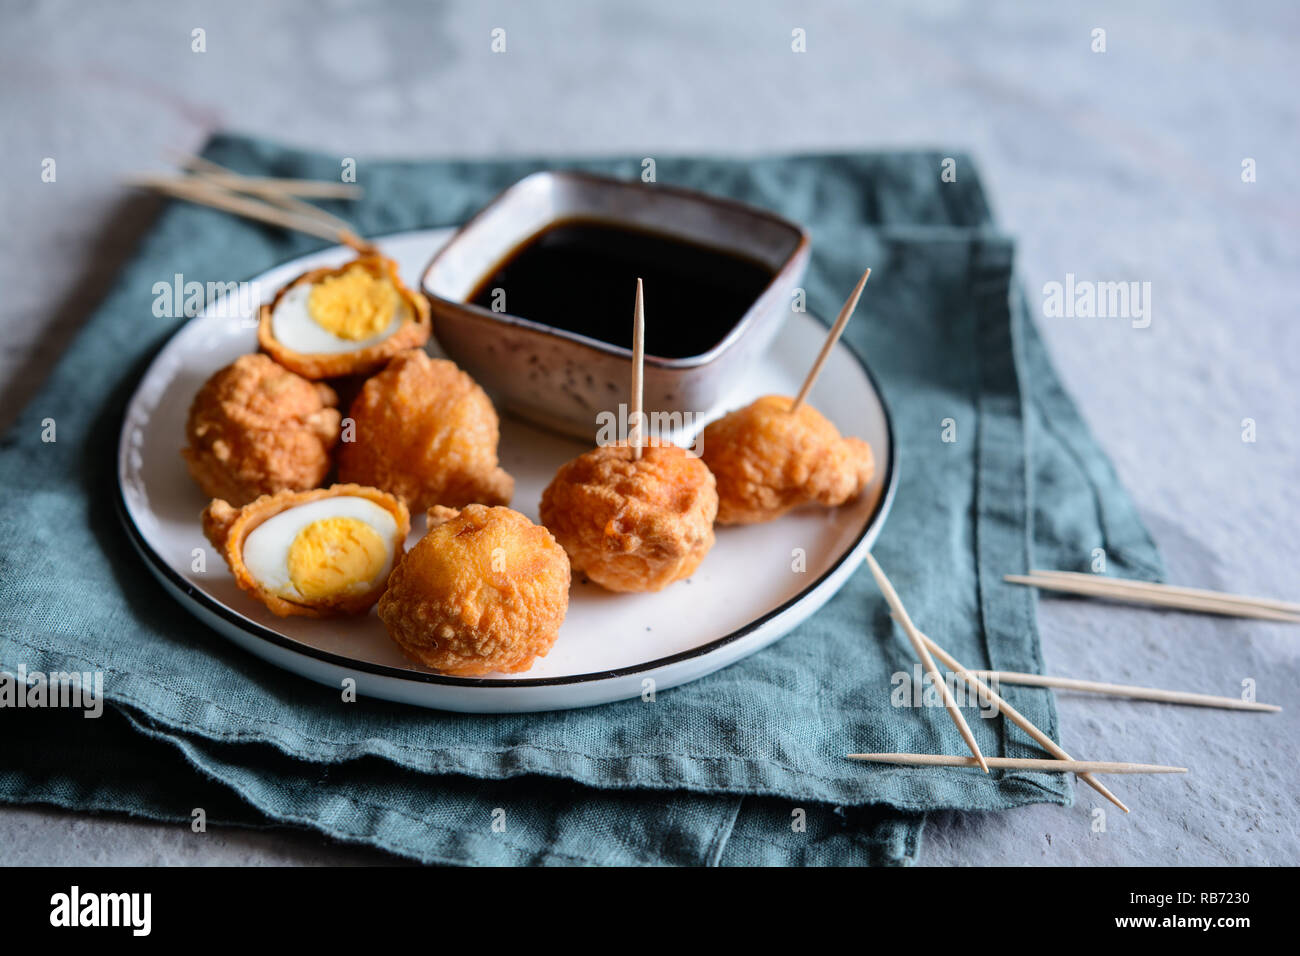 Kwek Kwek - traditional deep fried quail eggs coated with batter served with soya sauce and vinegar dip Stock Photo